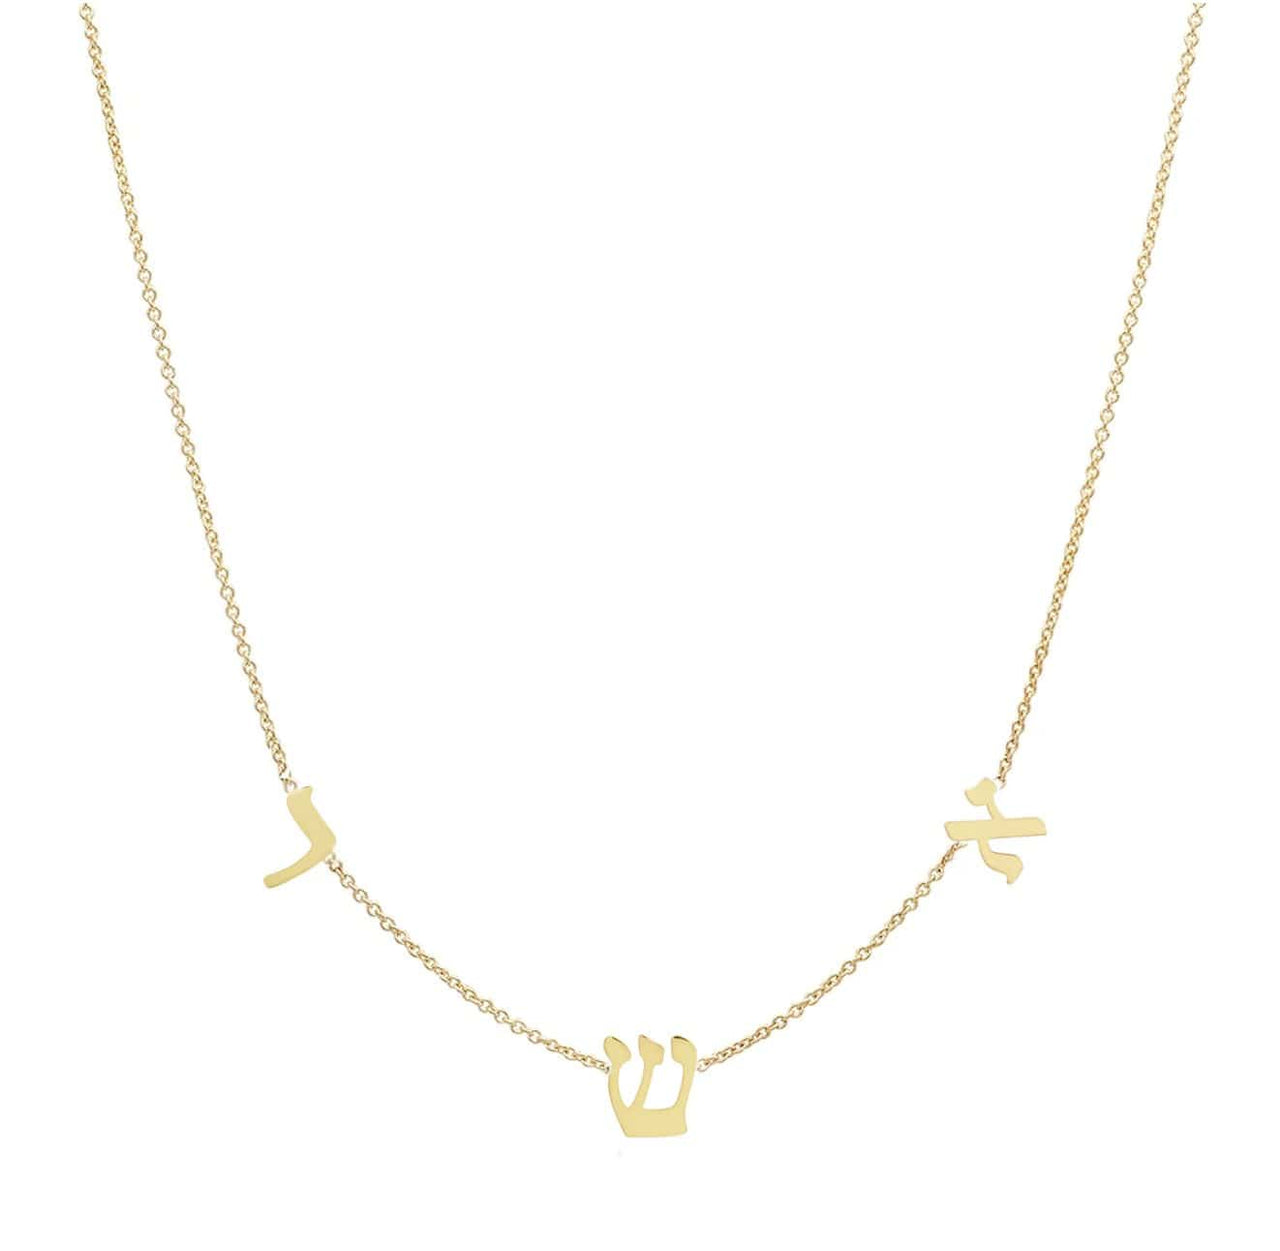 Miriam Merenfeld Jewelry Necklaces Taly Initial Necklace - Silver or Gold (Up to 6 Letters)